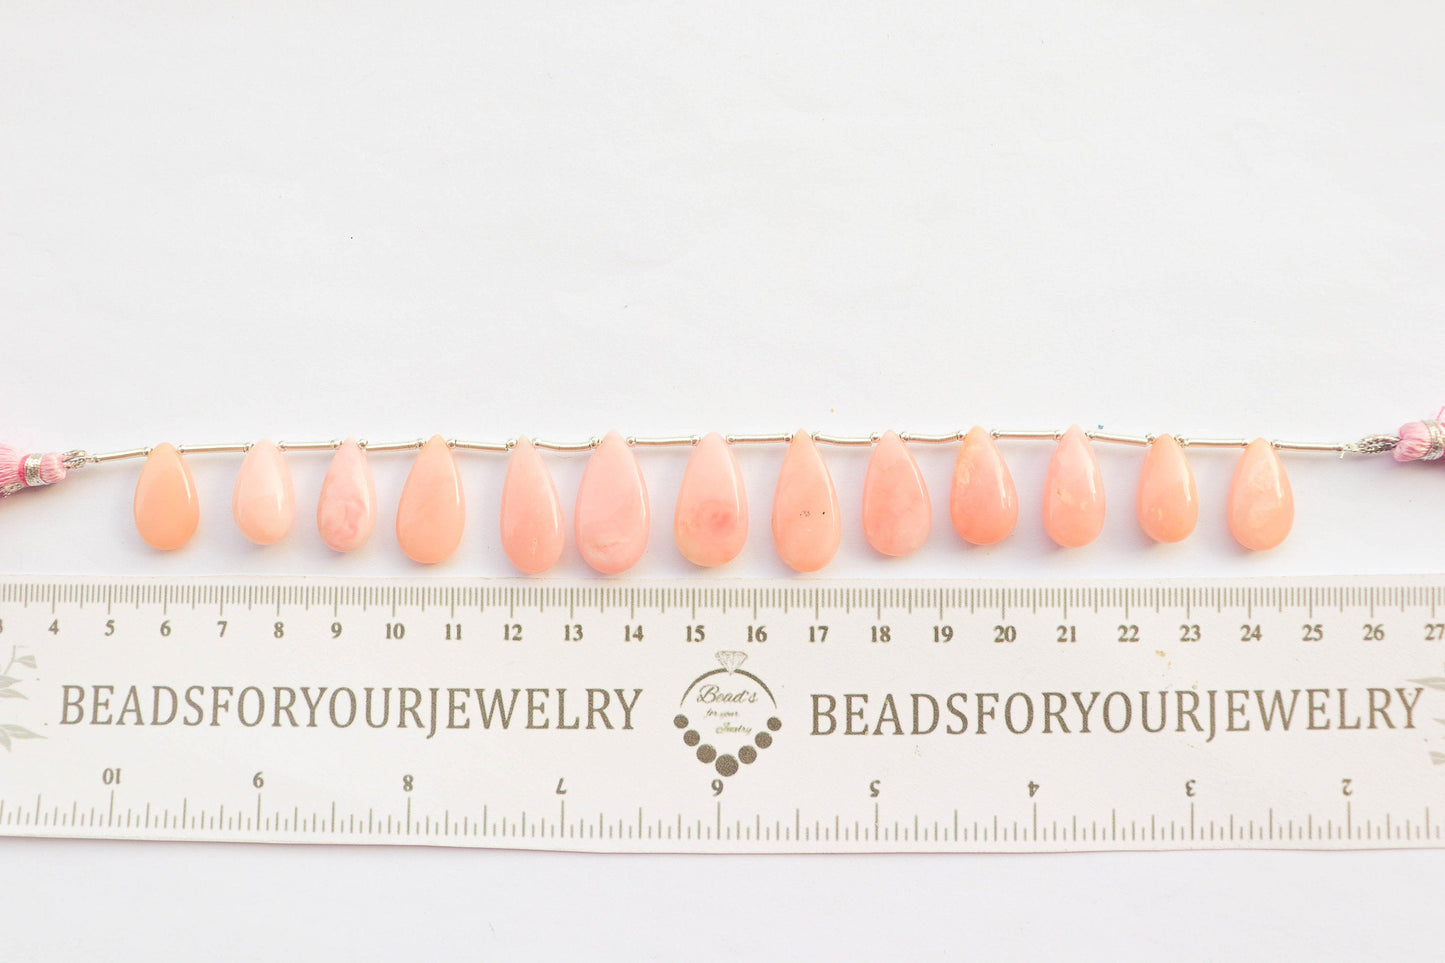 Pink Peruvian Opal Smooth Pear Briolette | 10x18mm to 12x25mm | 8 inch strand | 13 Pieces | Natural Pink Opal Gemstone Beadsforyourjewelry